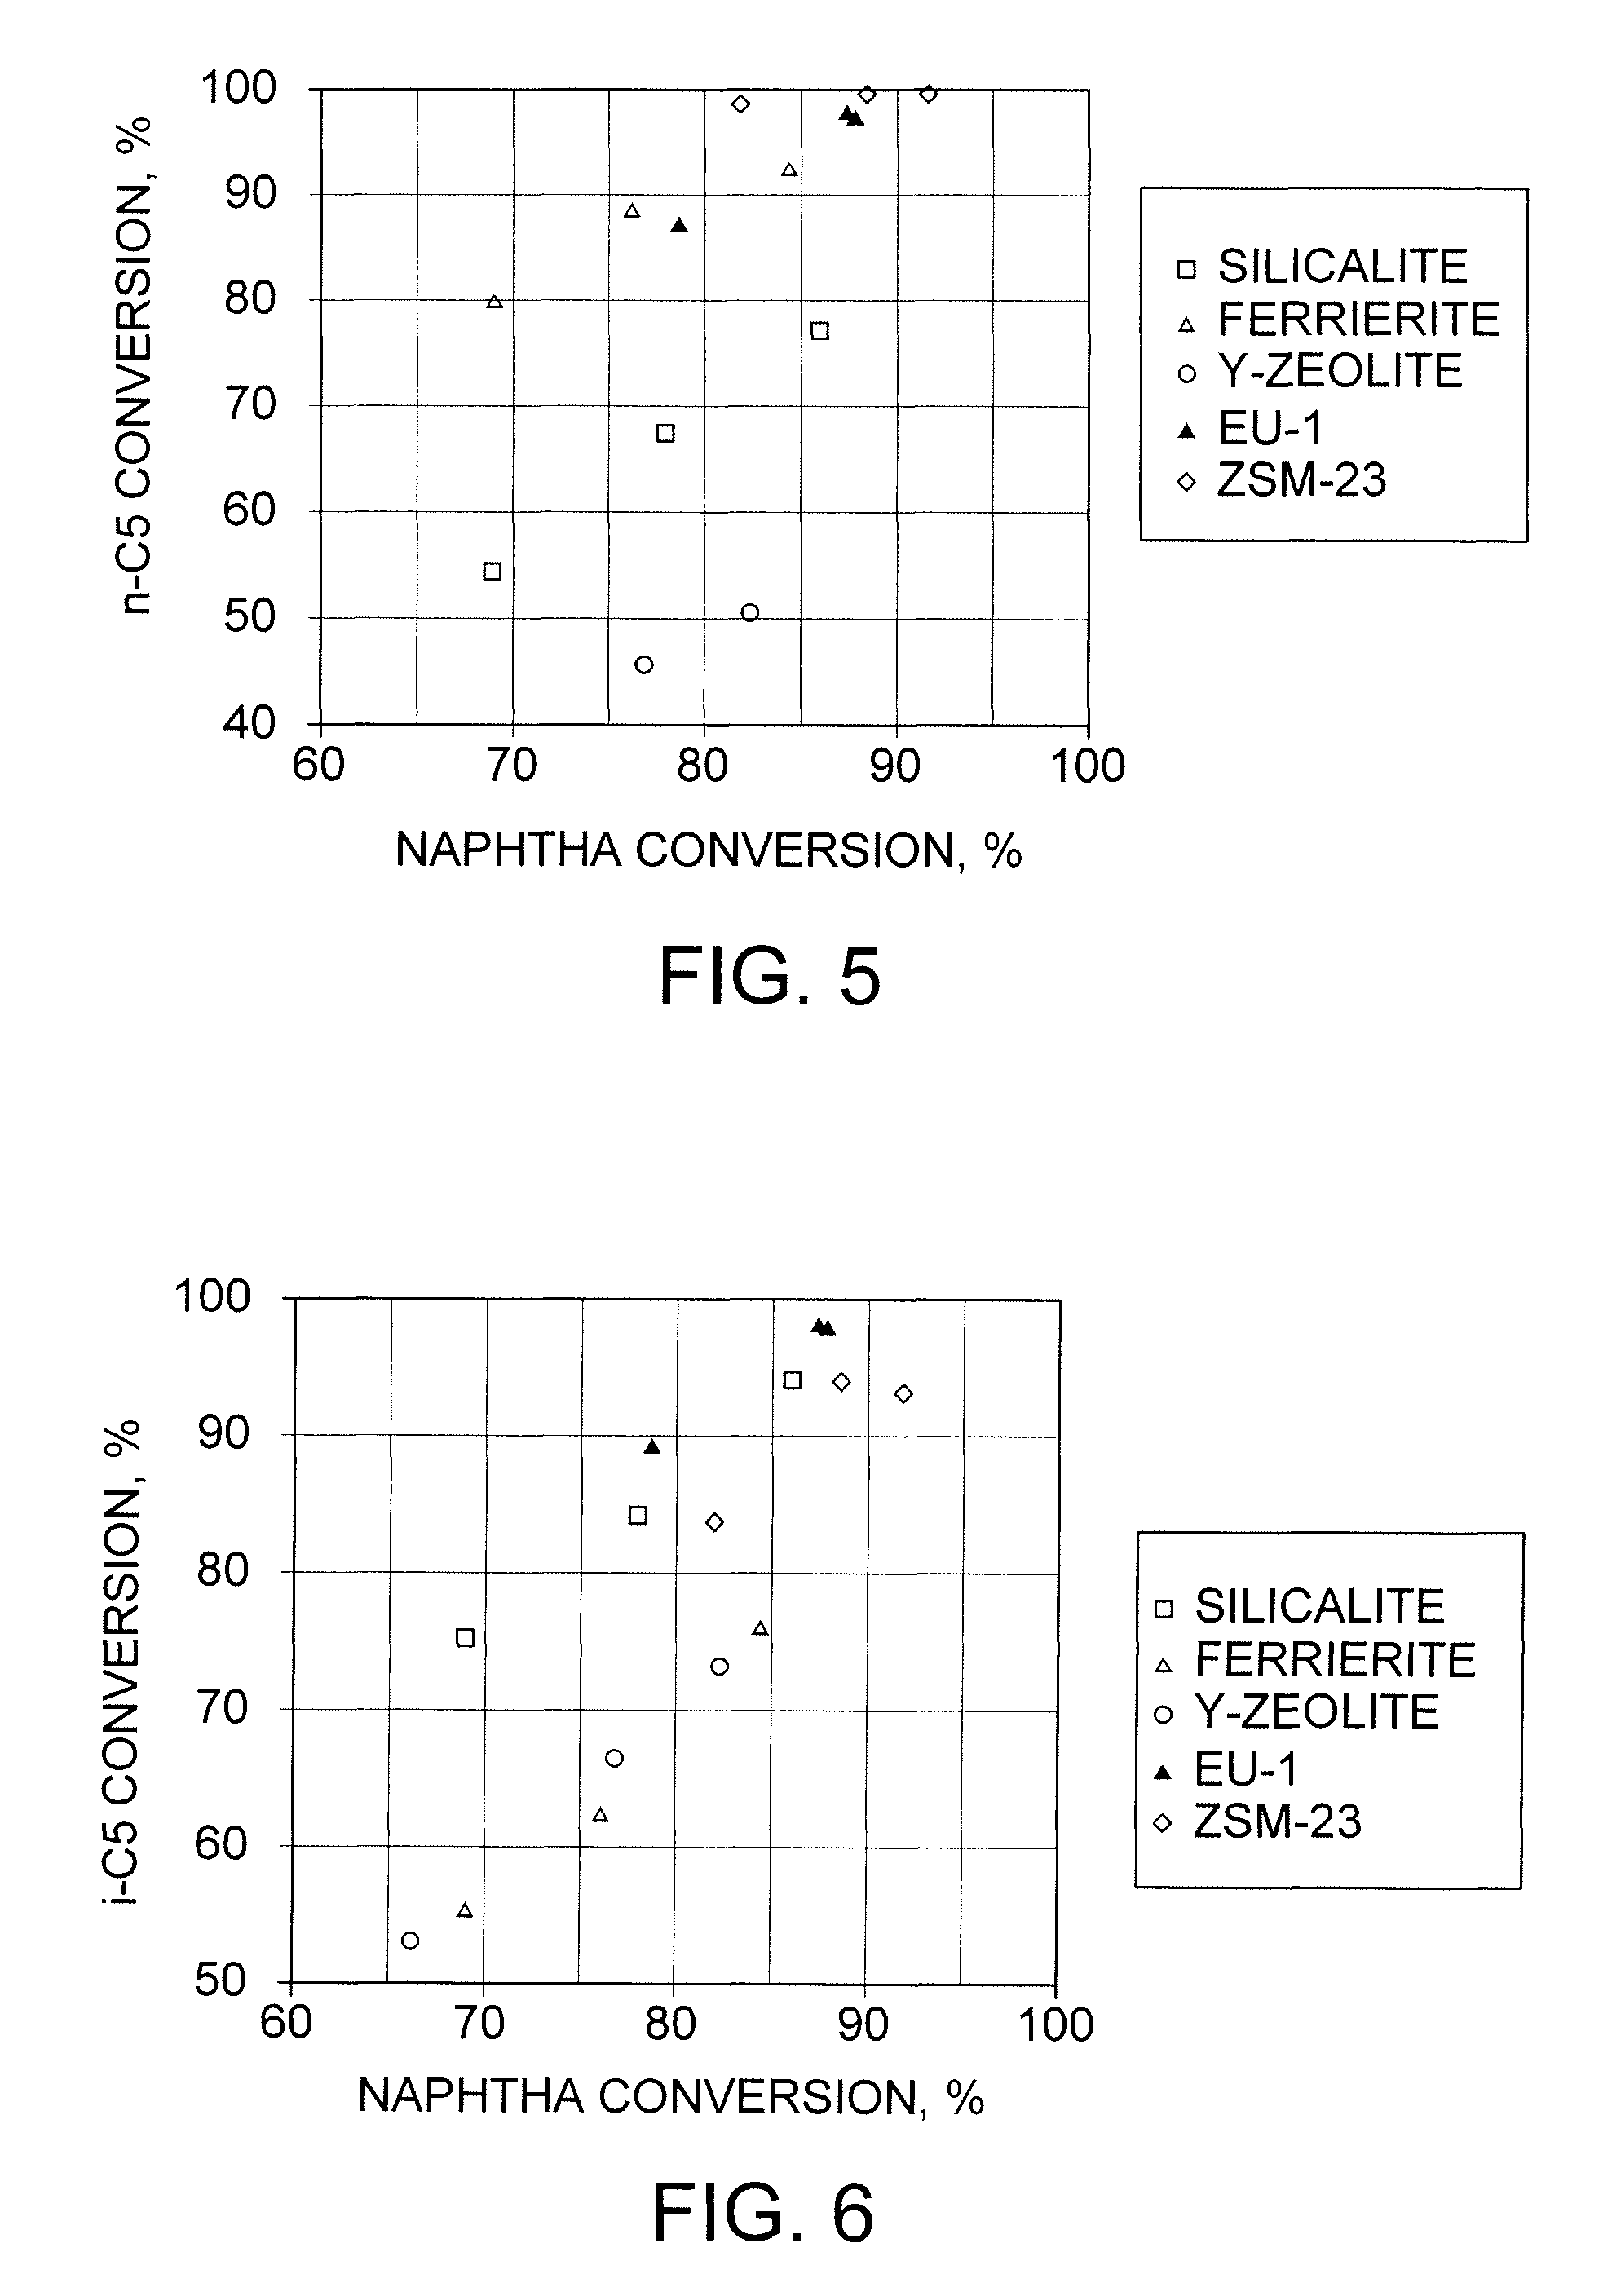 Mixture of catalysts for cracking naphtha to olefins